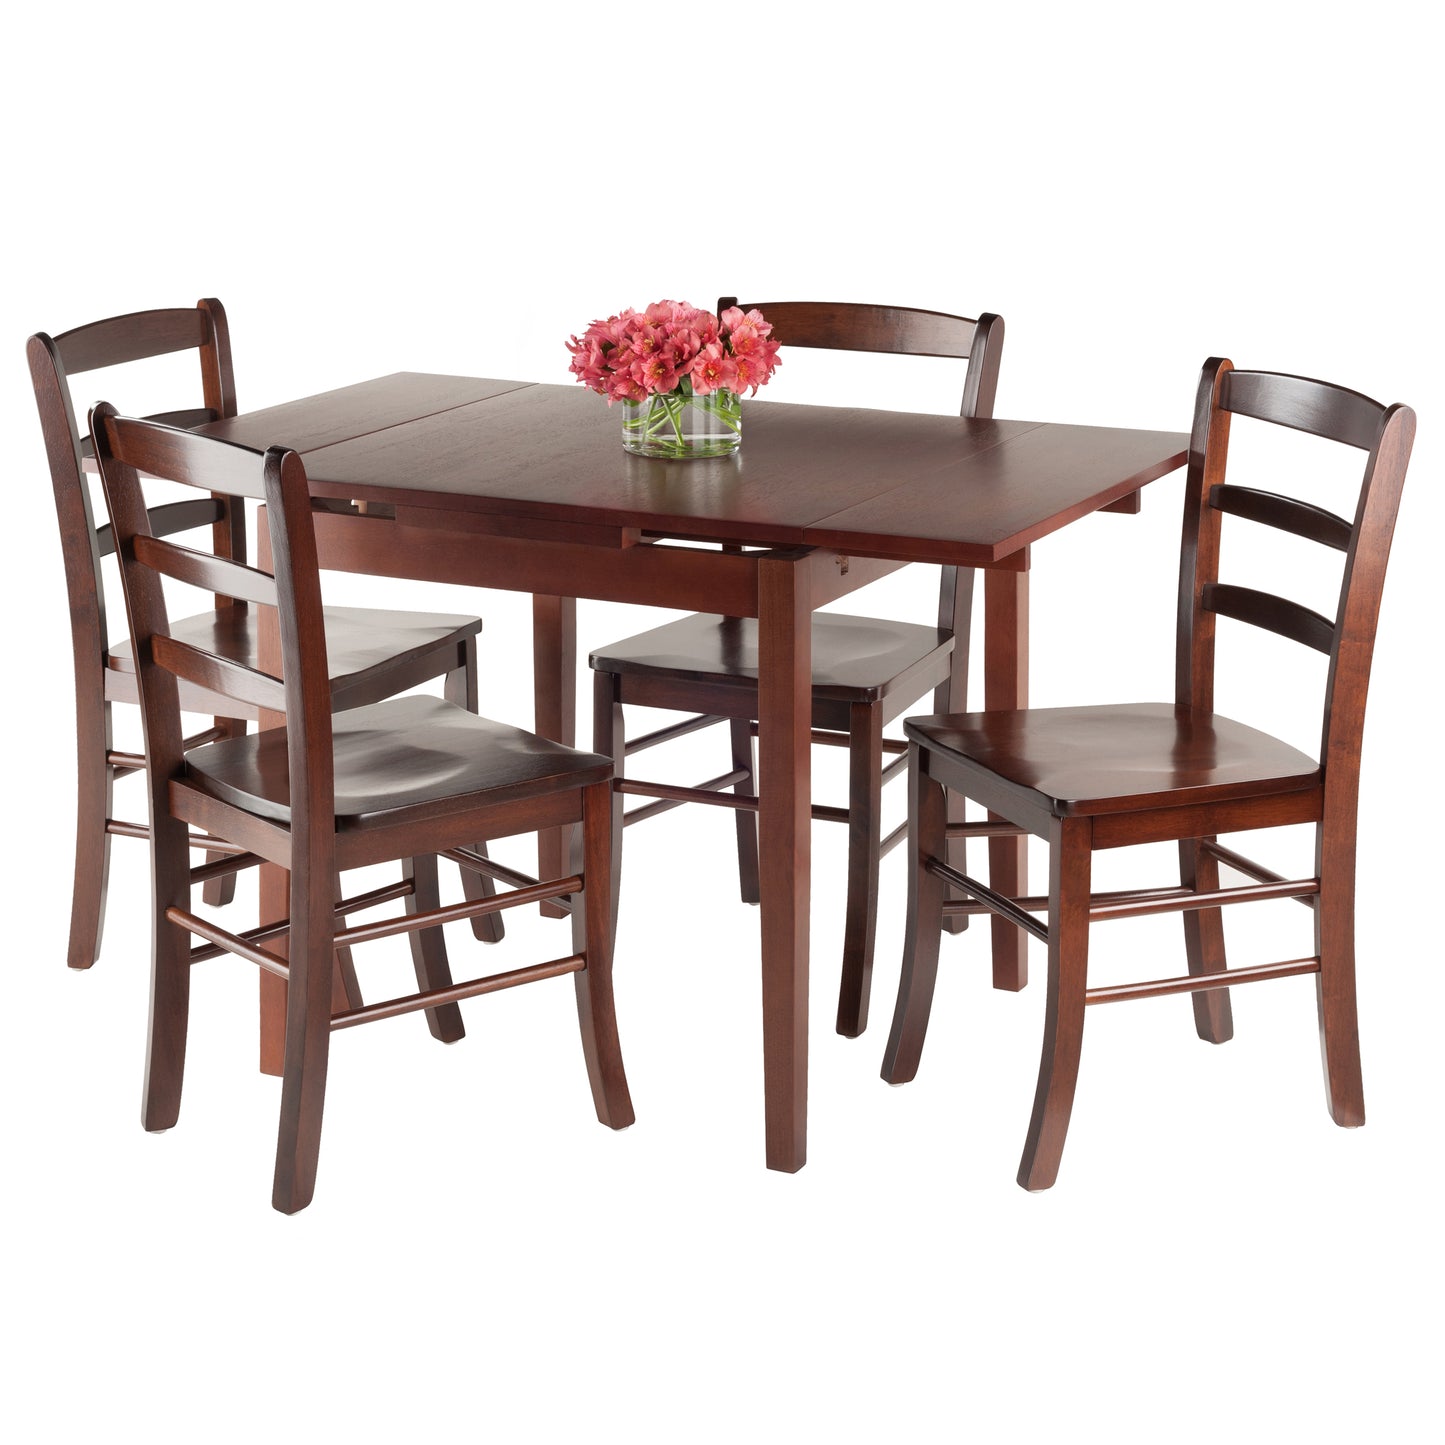 Pulman 5-Pc Extendable Table with Ladder-back Chairs, Walnut